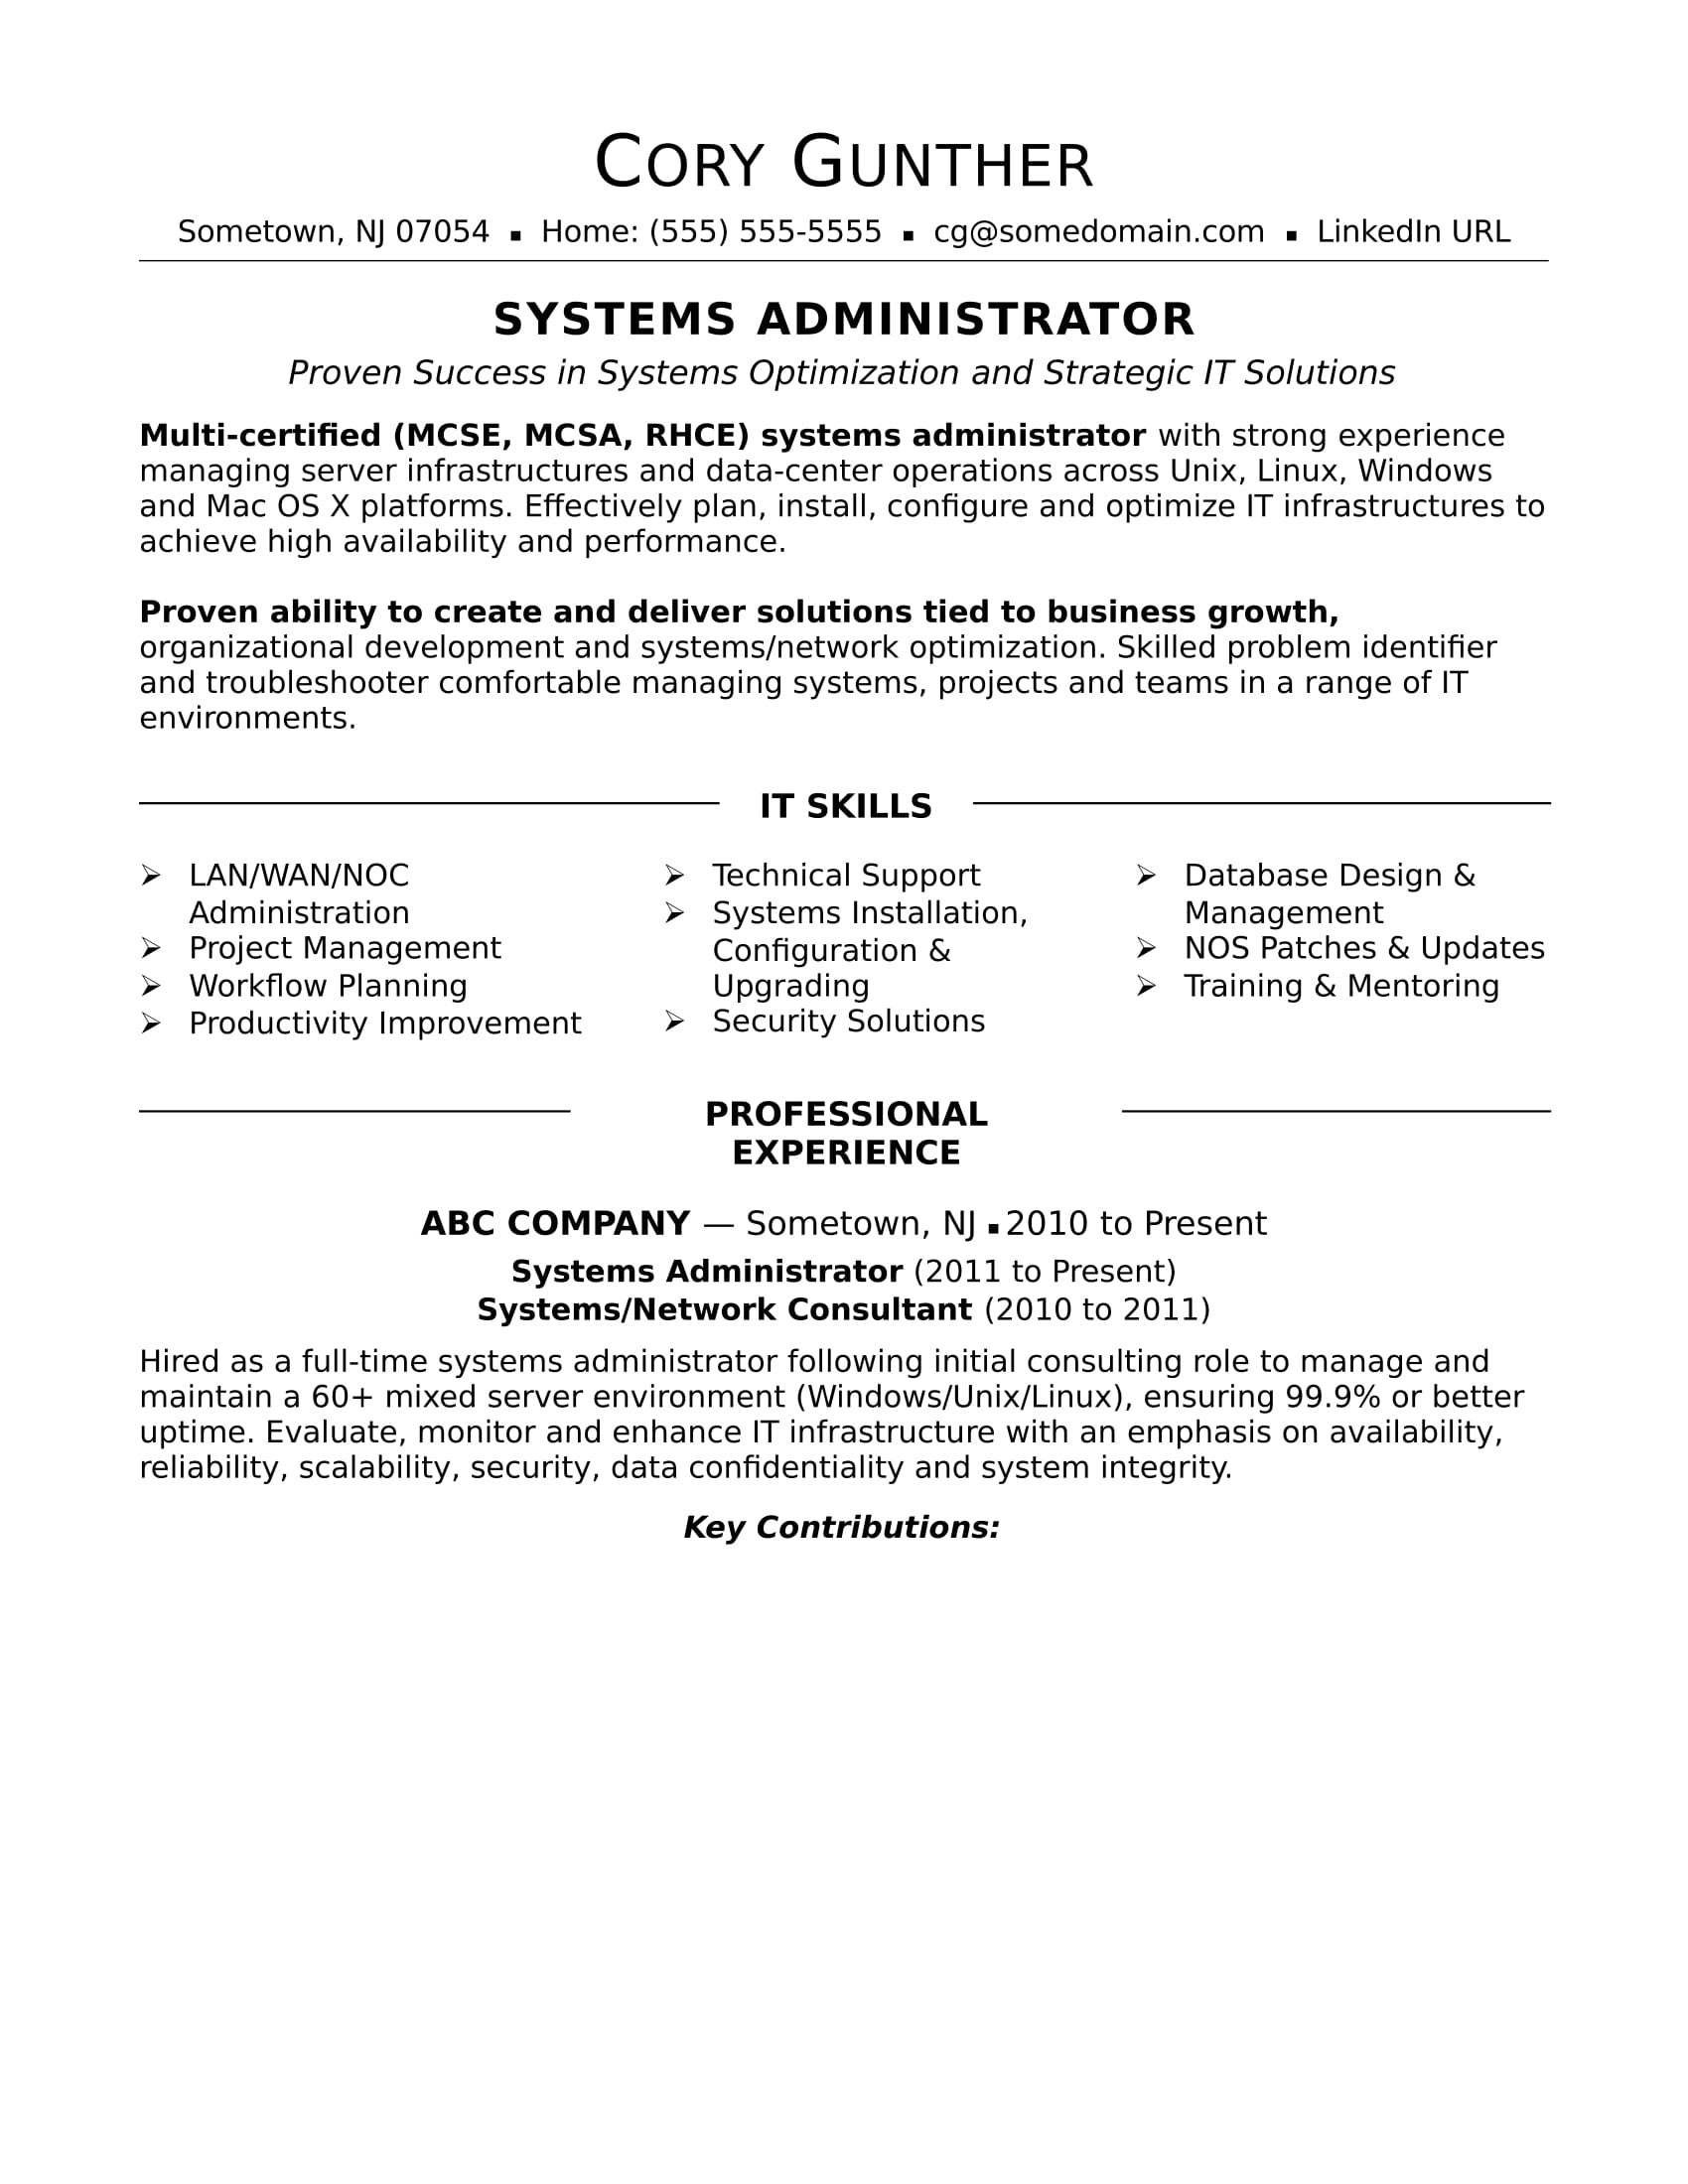 Sample Resume with Migration Of Company Systems Sample Resume for An Experienced Systems Administrator Monster.com